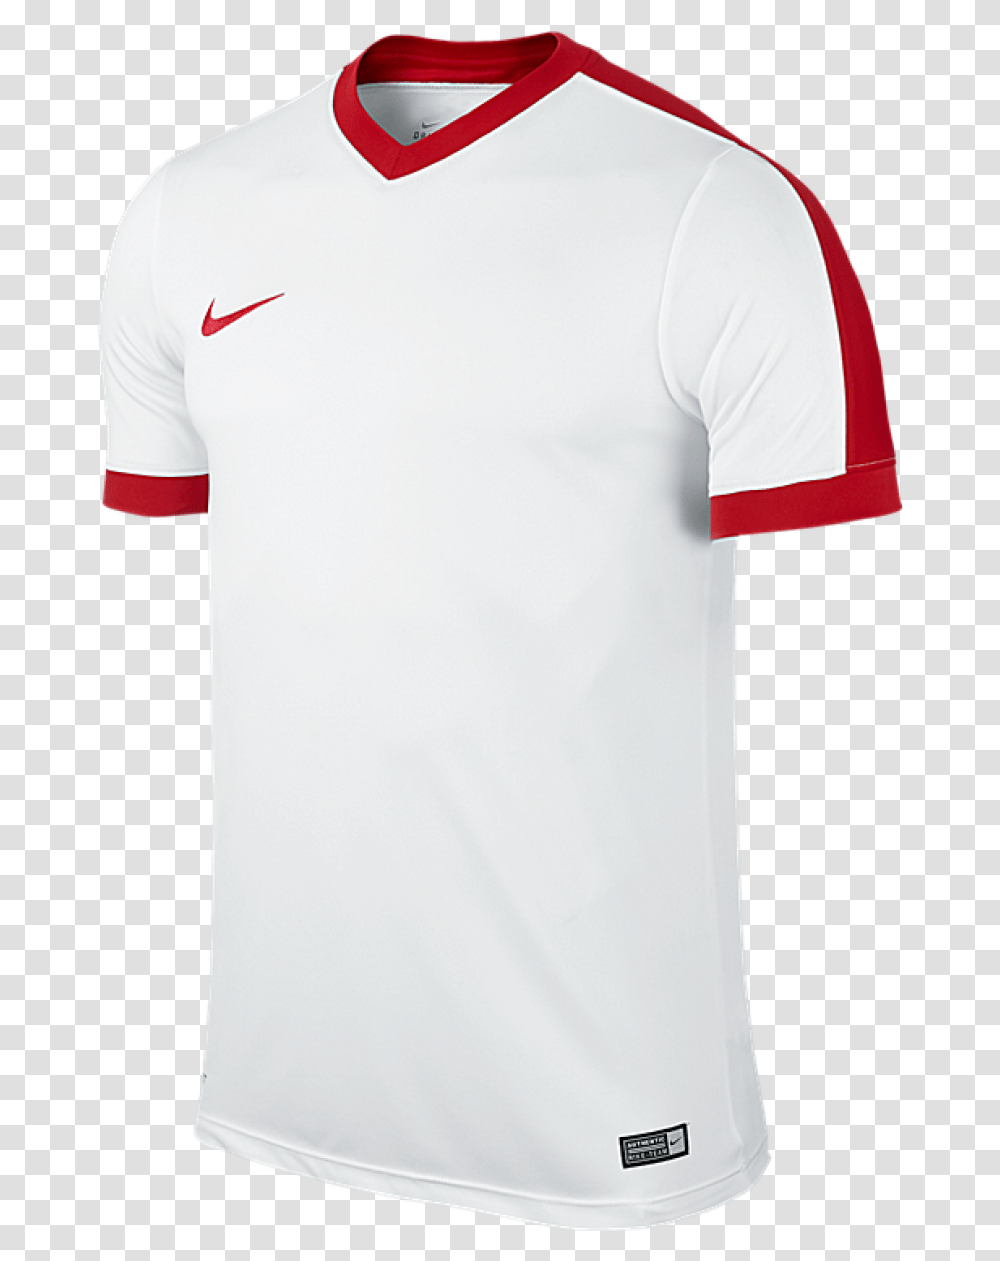 Nike Striker Iv Jersey White And Red Download Nike Striker Iv Jersey Pine Green, Apparel, Shirt, T-Shirt Transparent Png